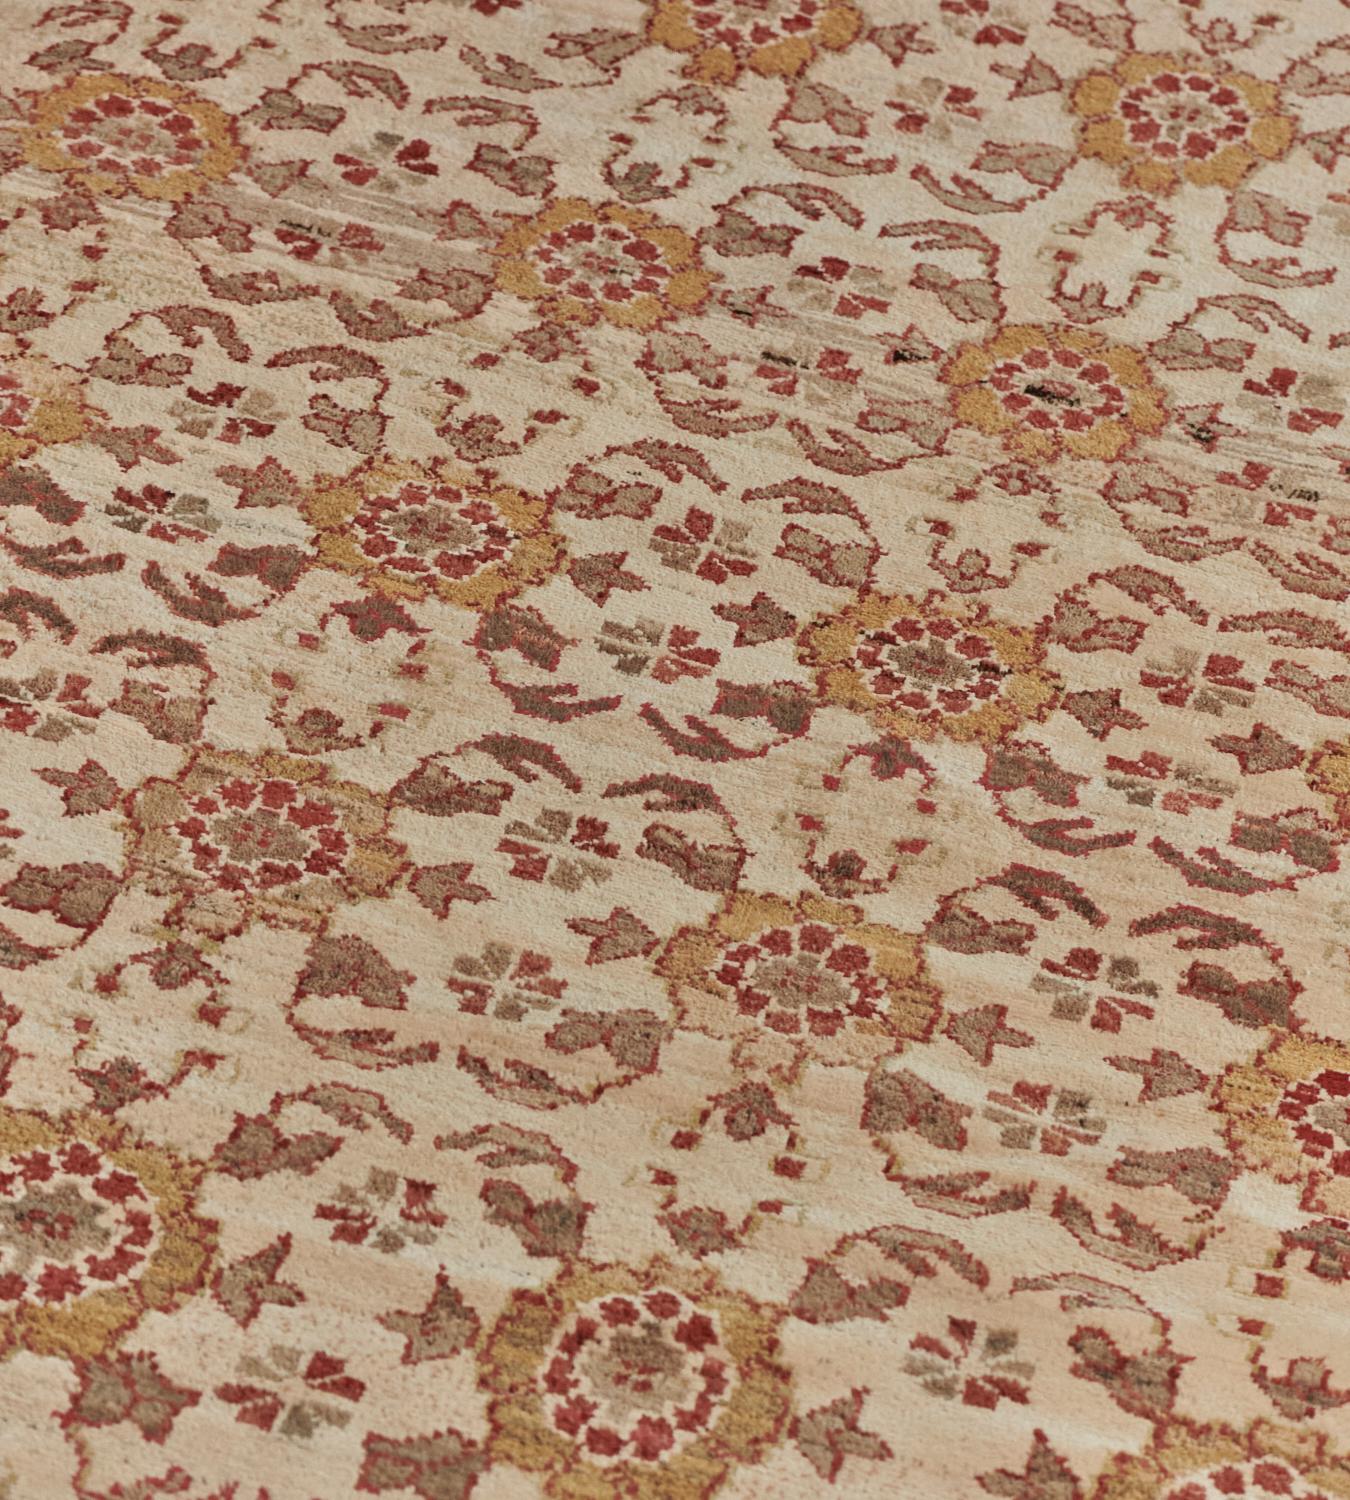 Handwoven Wool Floral Turkish Deco Rug In Excellent Condition For Sale In West Hollywood, CA